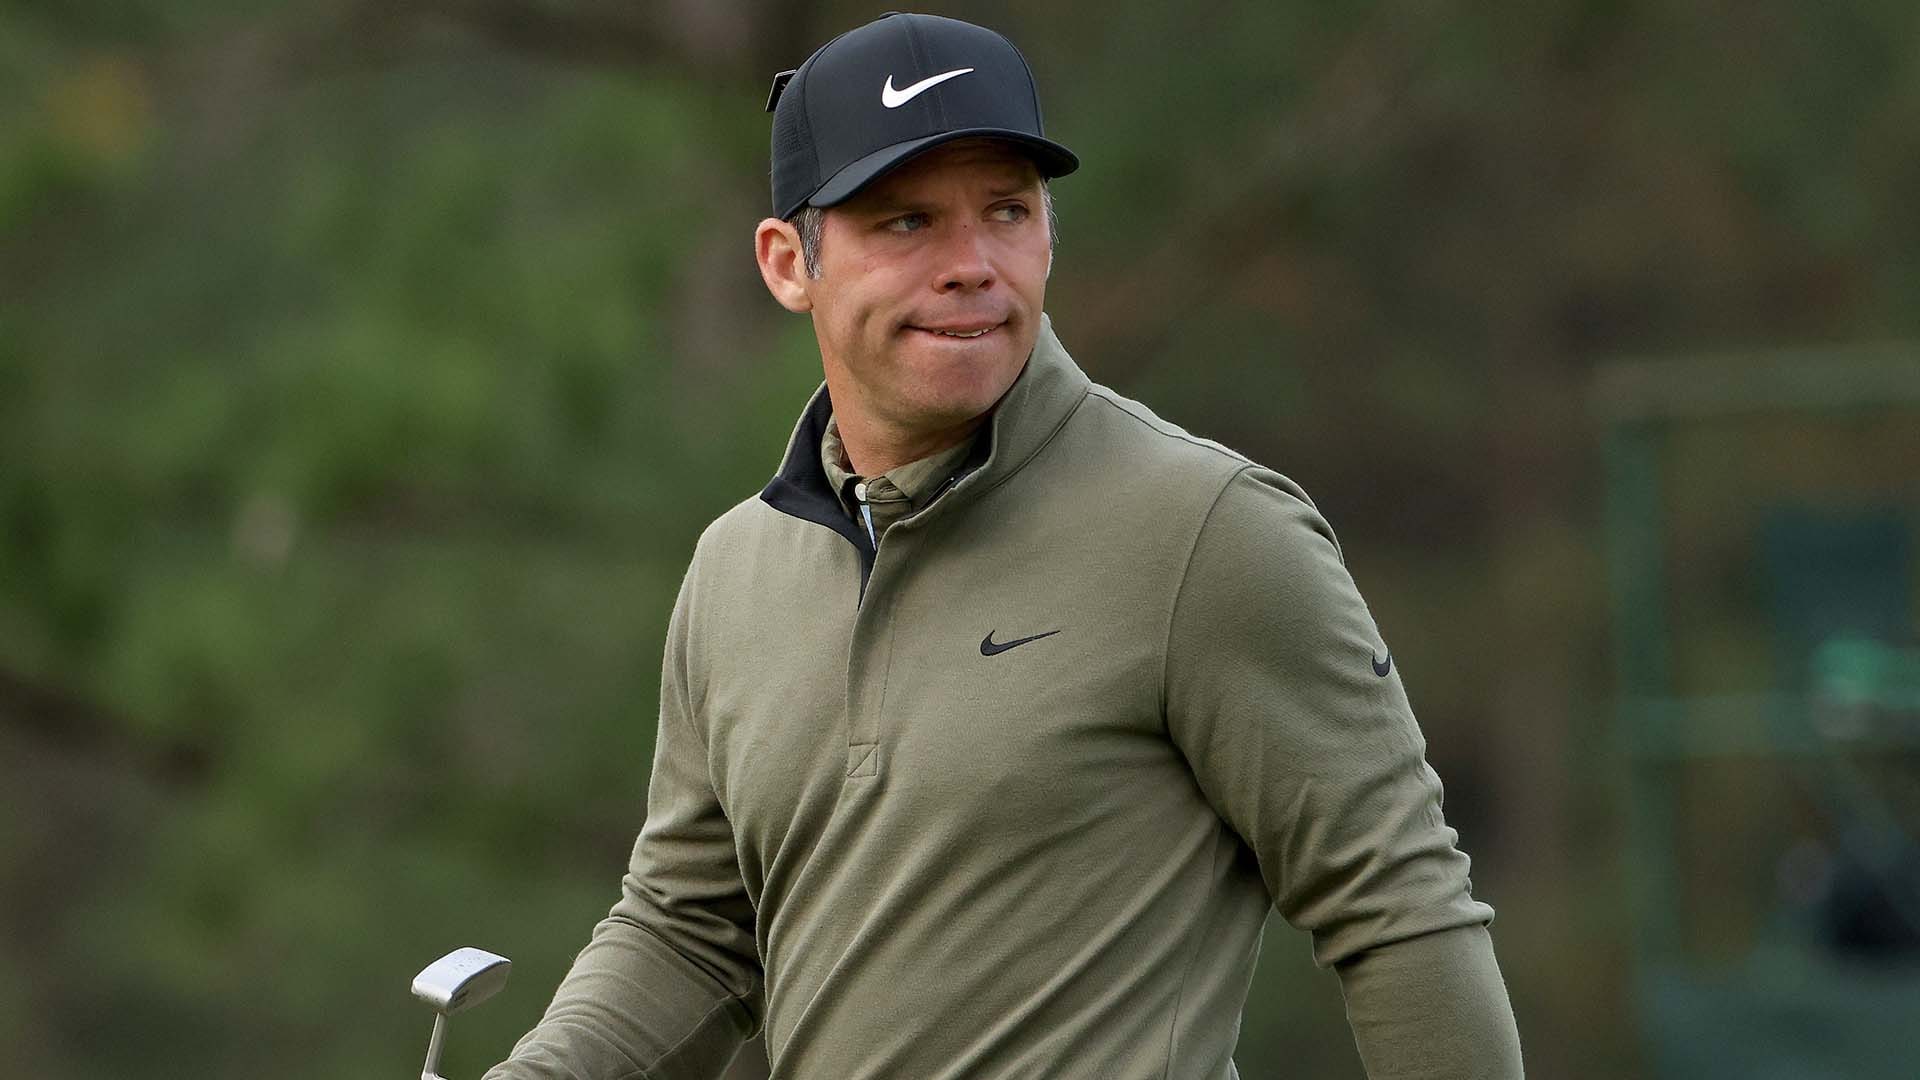 Paul Casey on playing Saudi event: ‘I hope my participation will make a difference’